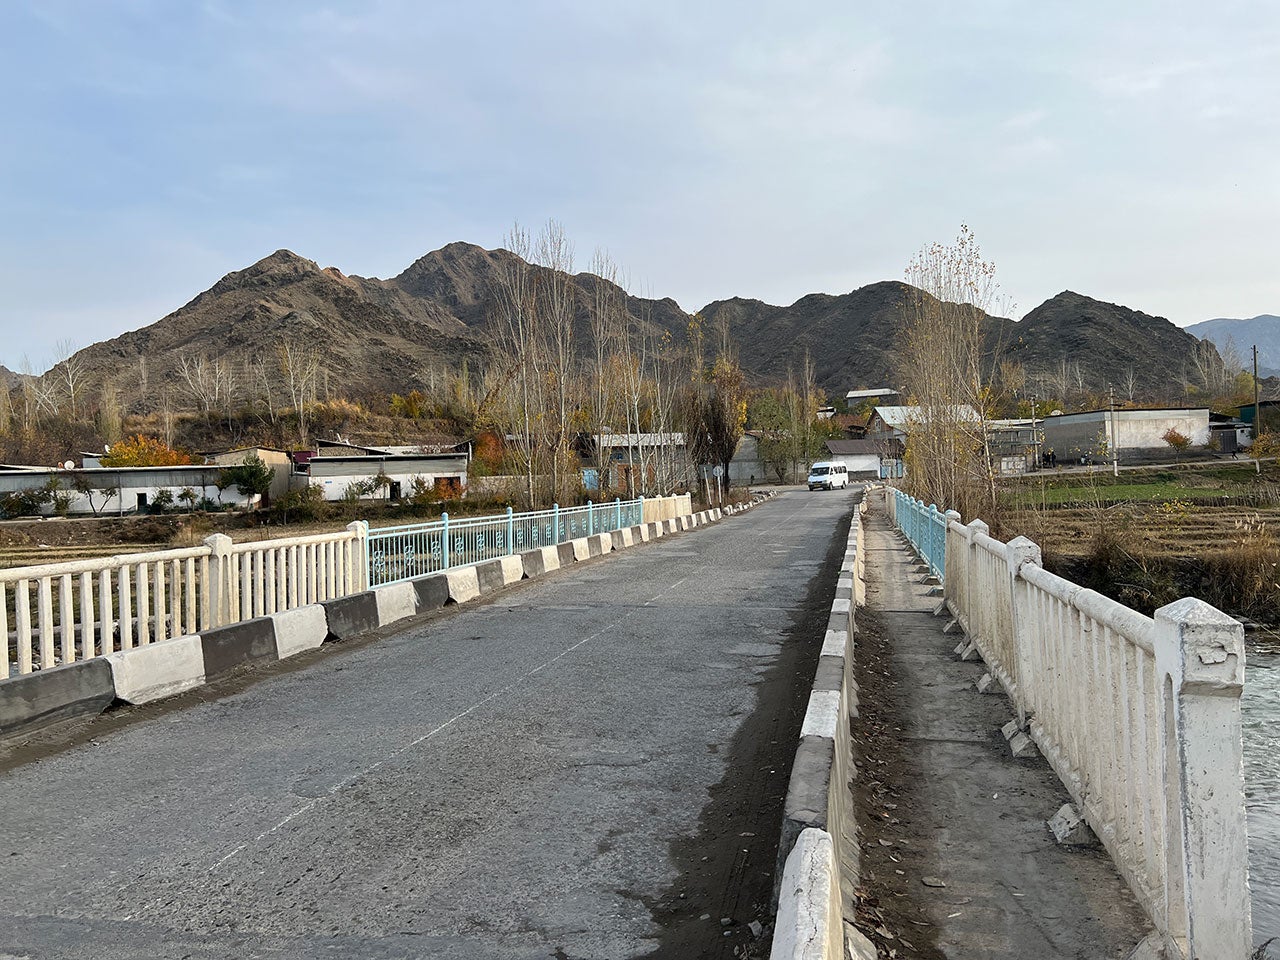 The bridge linking the Tajik villages of Chordeh and Chorbog on the border near the Kyrgyz village of Dostuk (Batken district), where two Tajik ambulances and a car with civilians came under attack on September 16, 2022. Burnt-down trees at the end of the bridge marks the location where one of the ambulances was attacked.